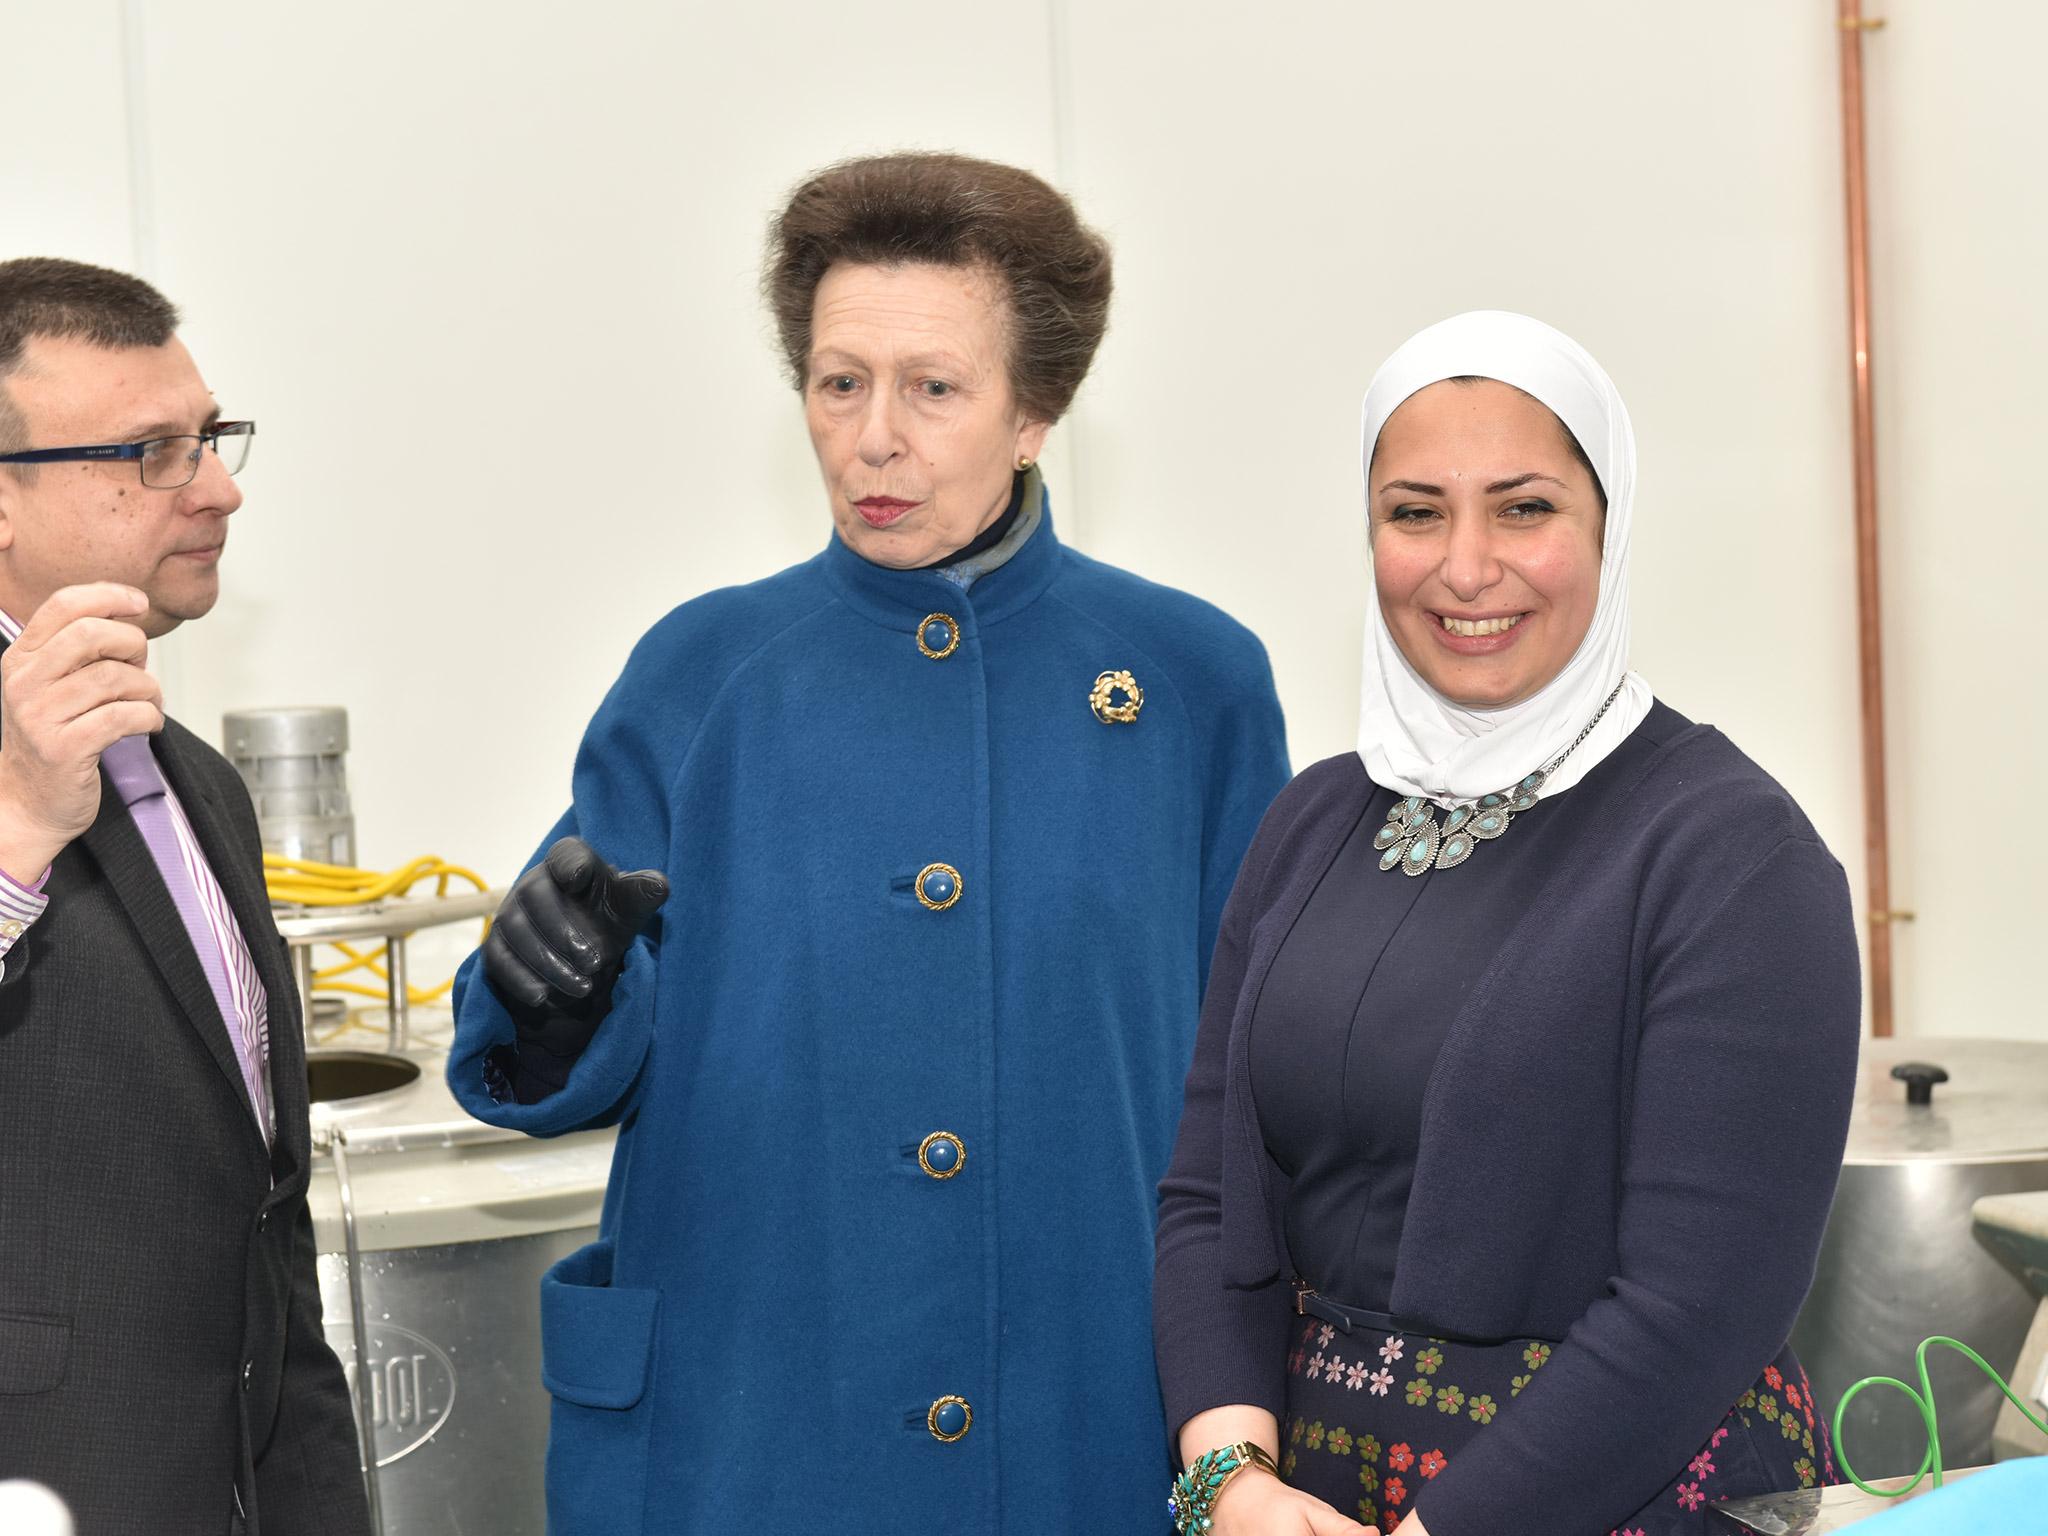 The Princess Royal visited the Yorkshire Dama Cheese company and watched it being made